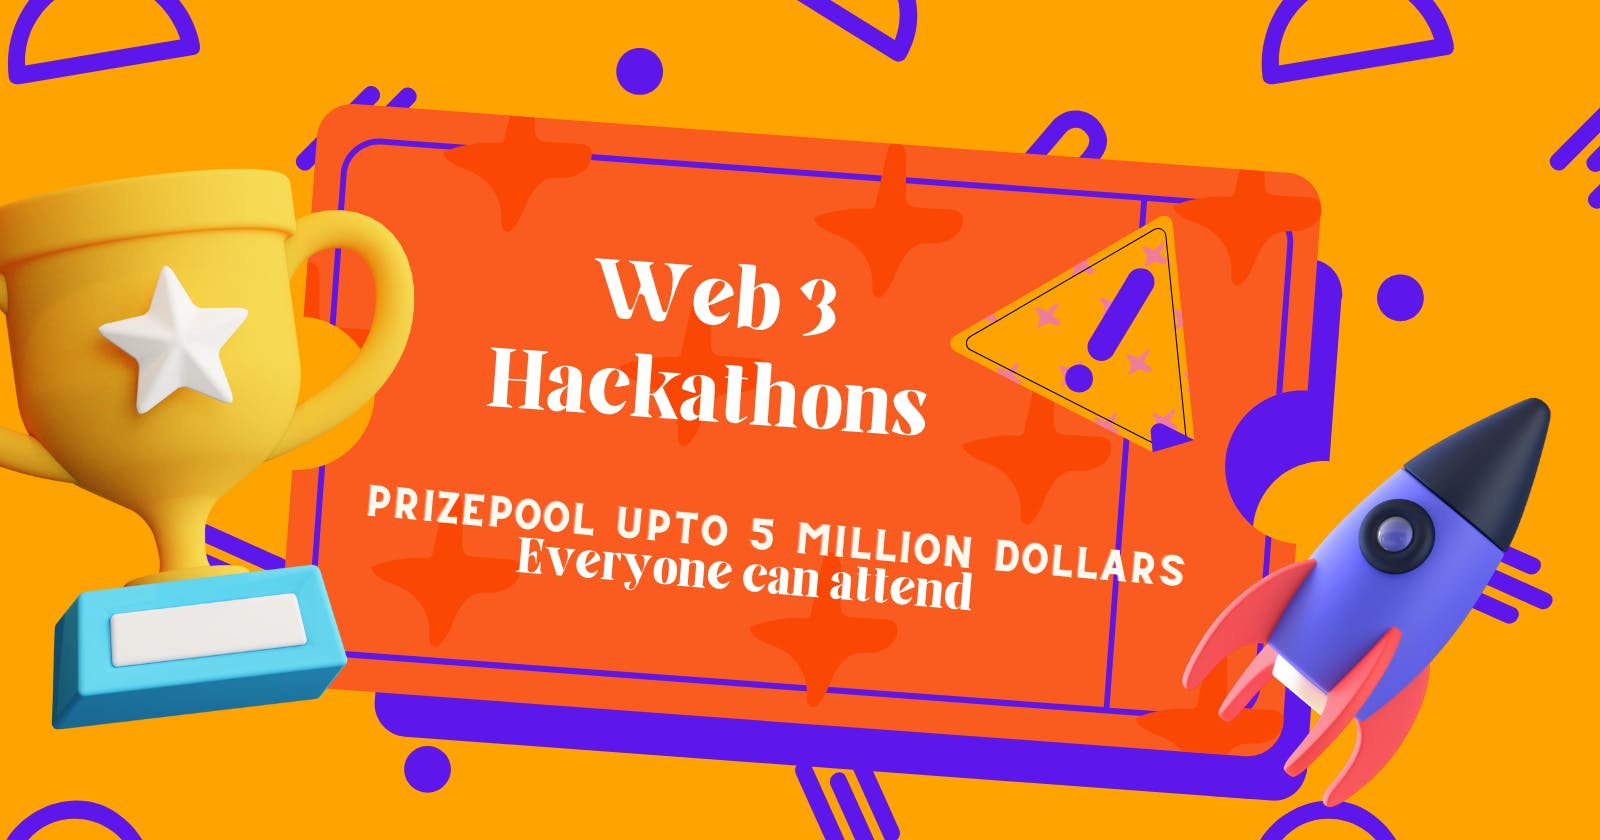 Web3 Hackathons you can attend